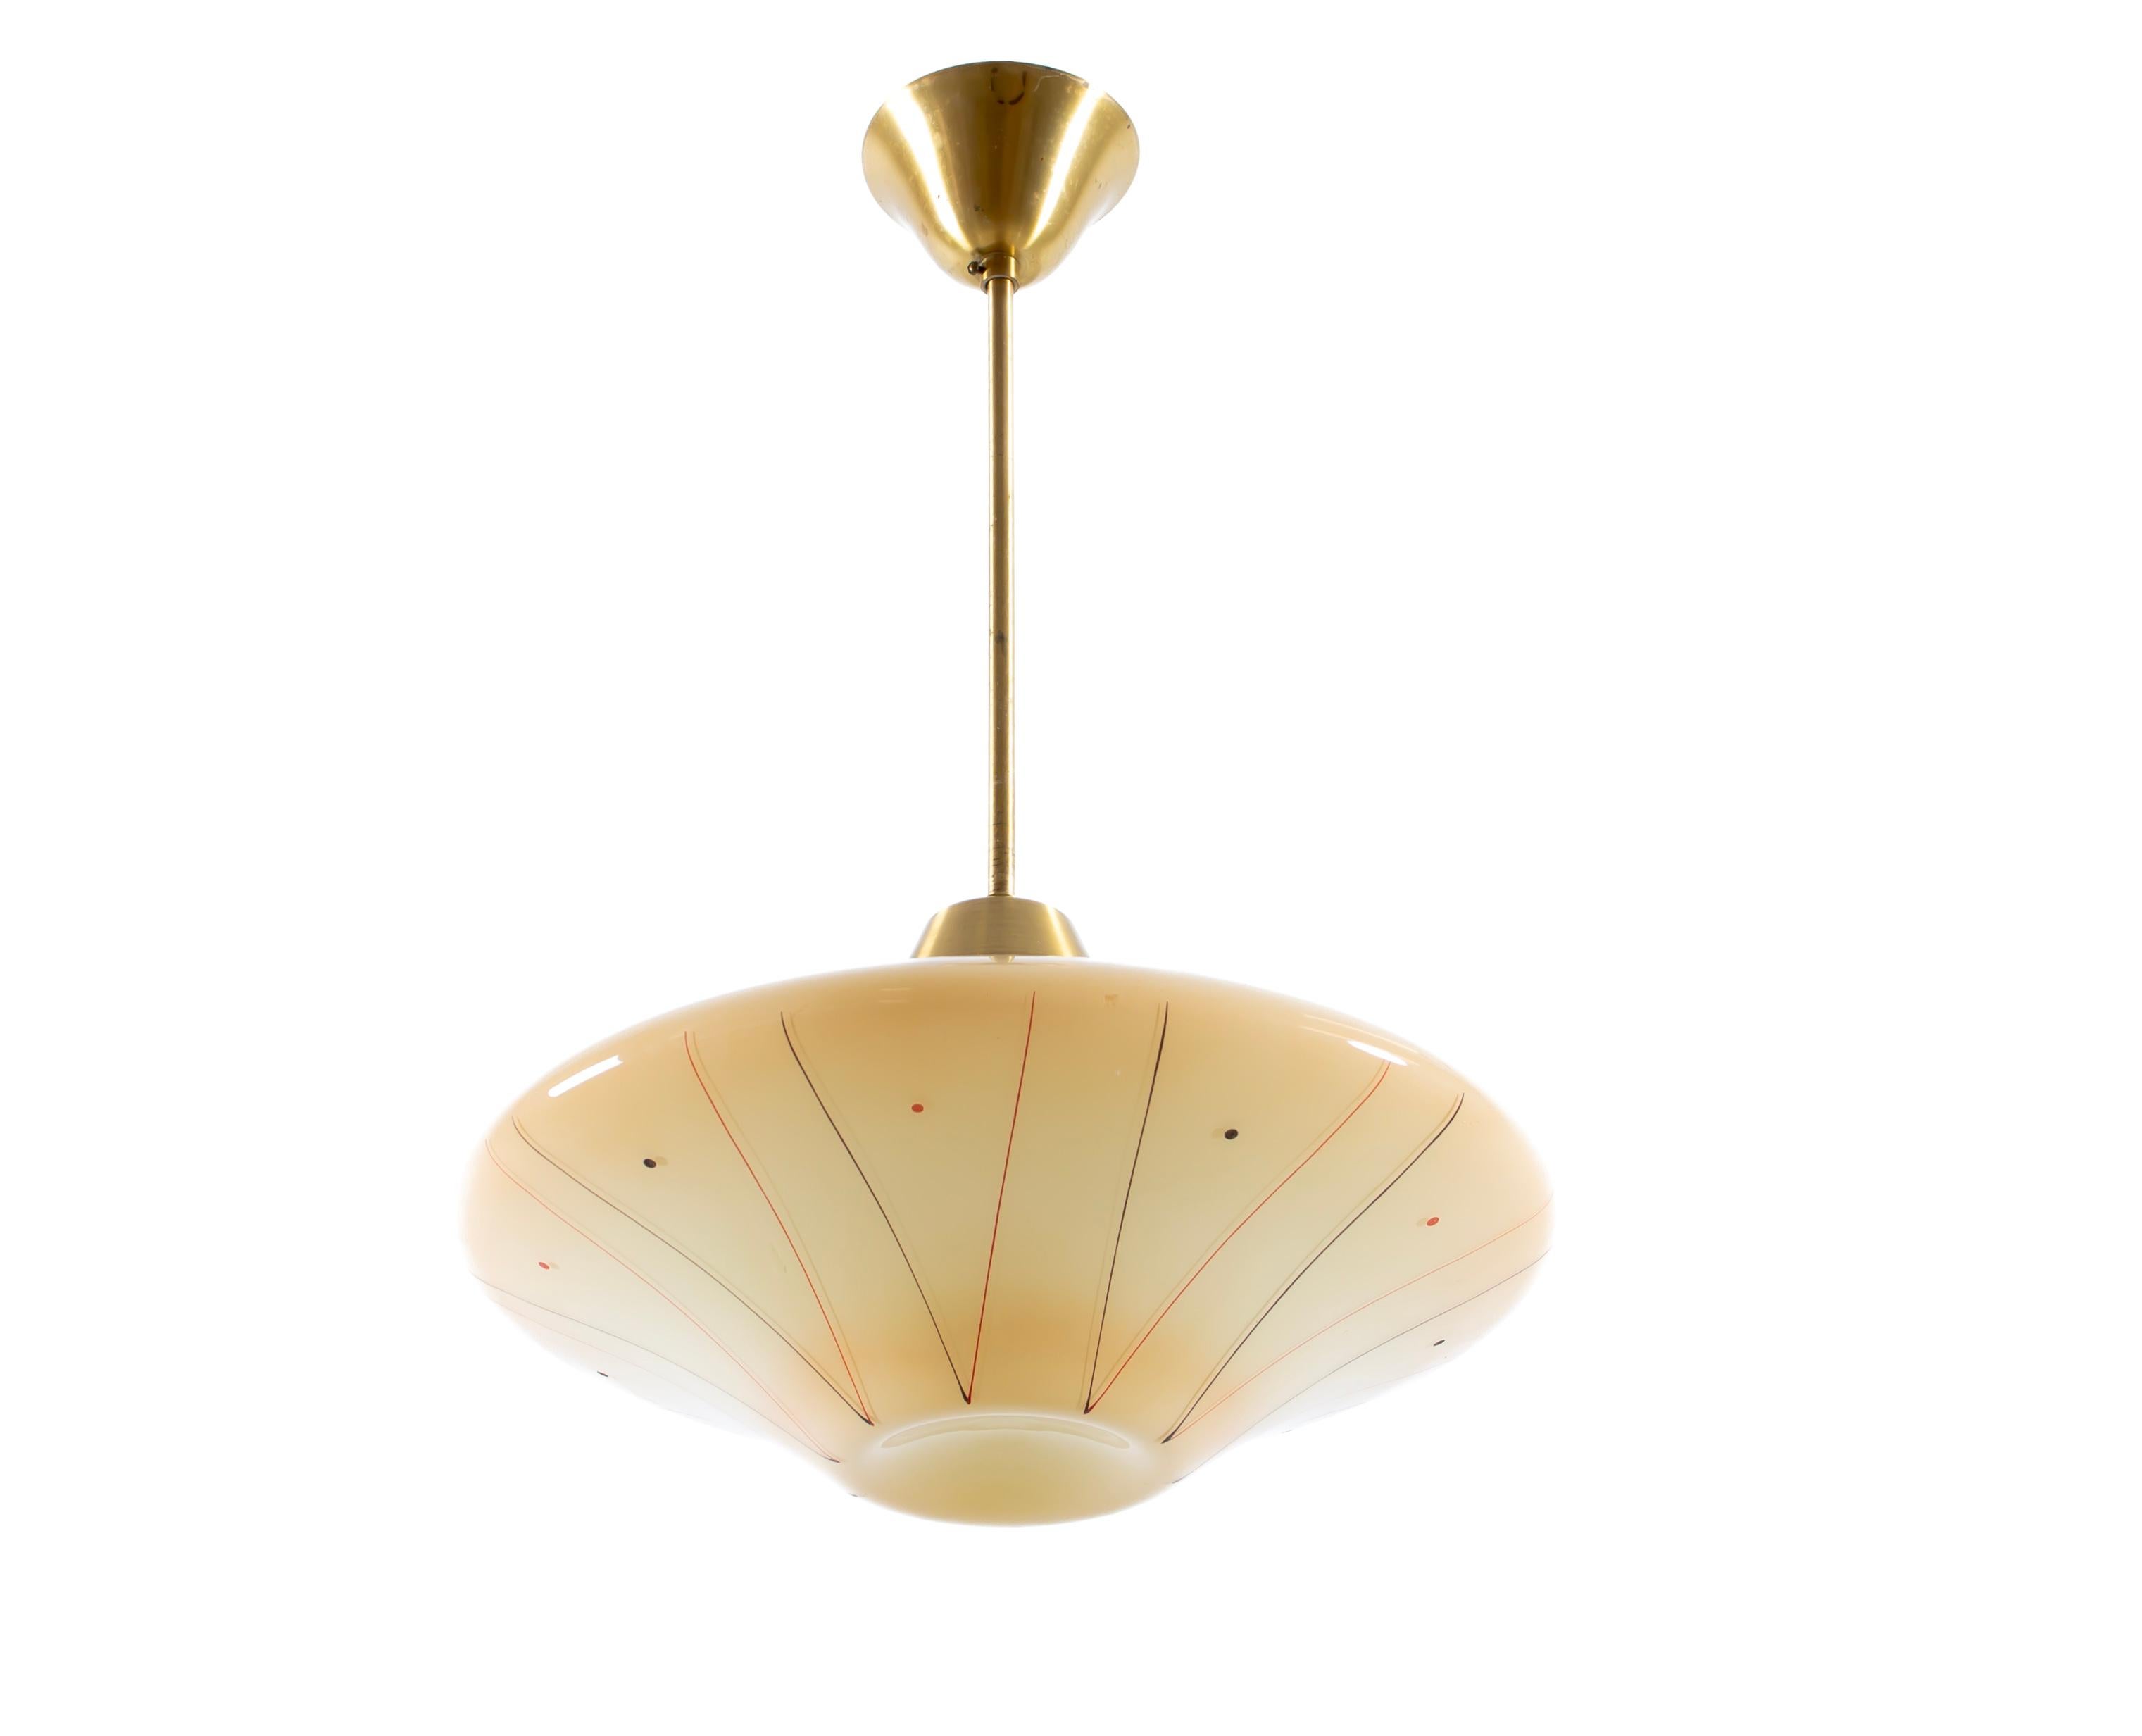 Modernist ceiling light in brass with decorated shade in blown glass. Designed and made in Norway from cirka 1950s second half. The lamp is fully working and in good vintage condition. It is fitted with one E27 bulb holder (works in the US), with a